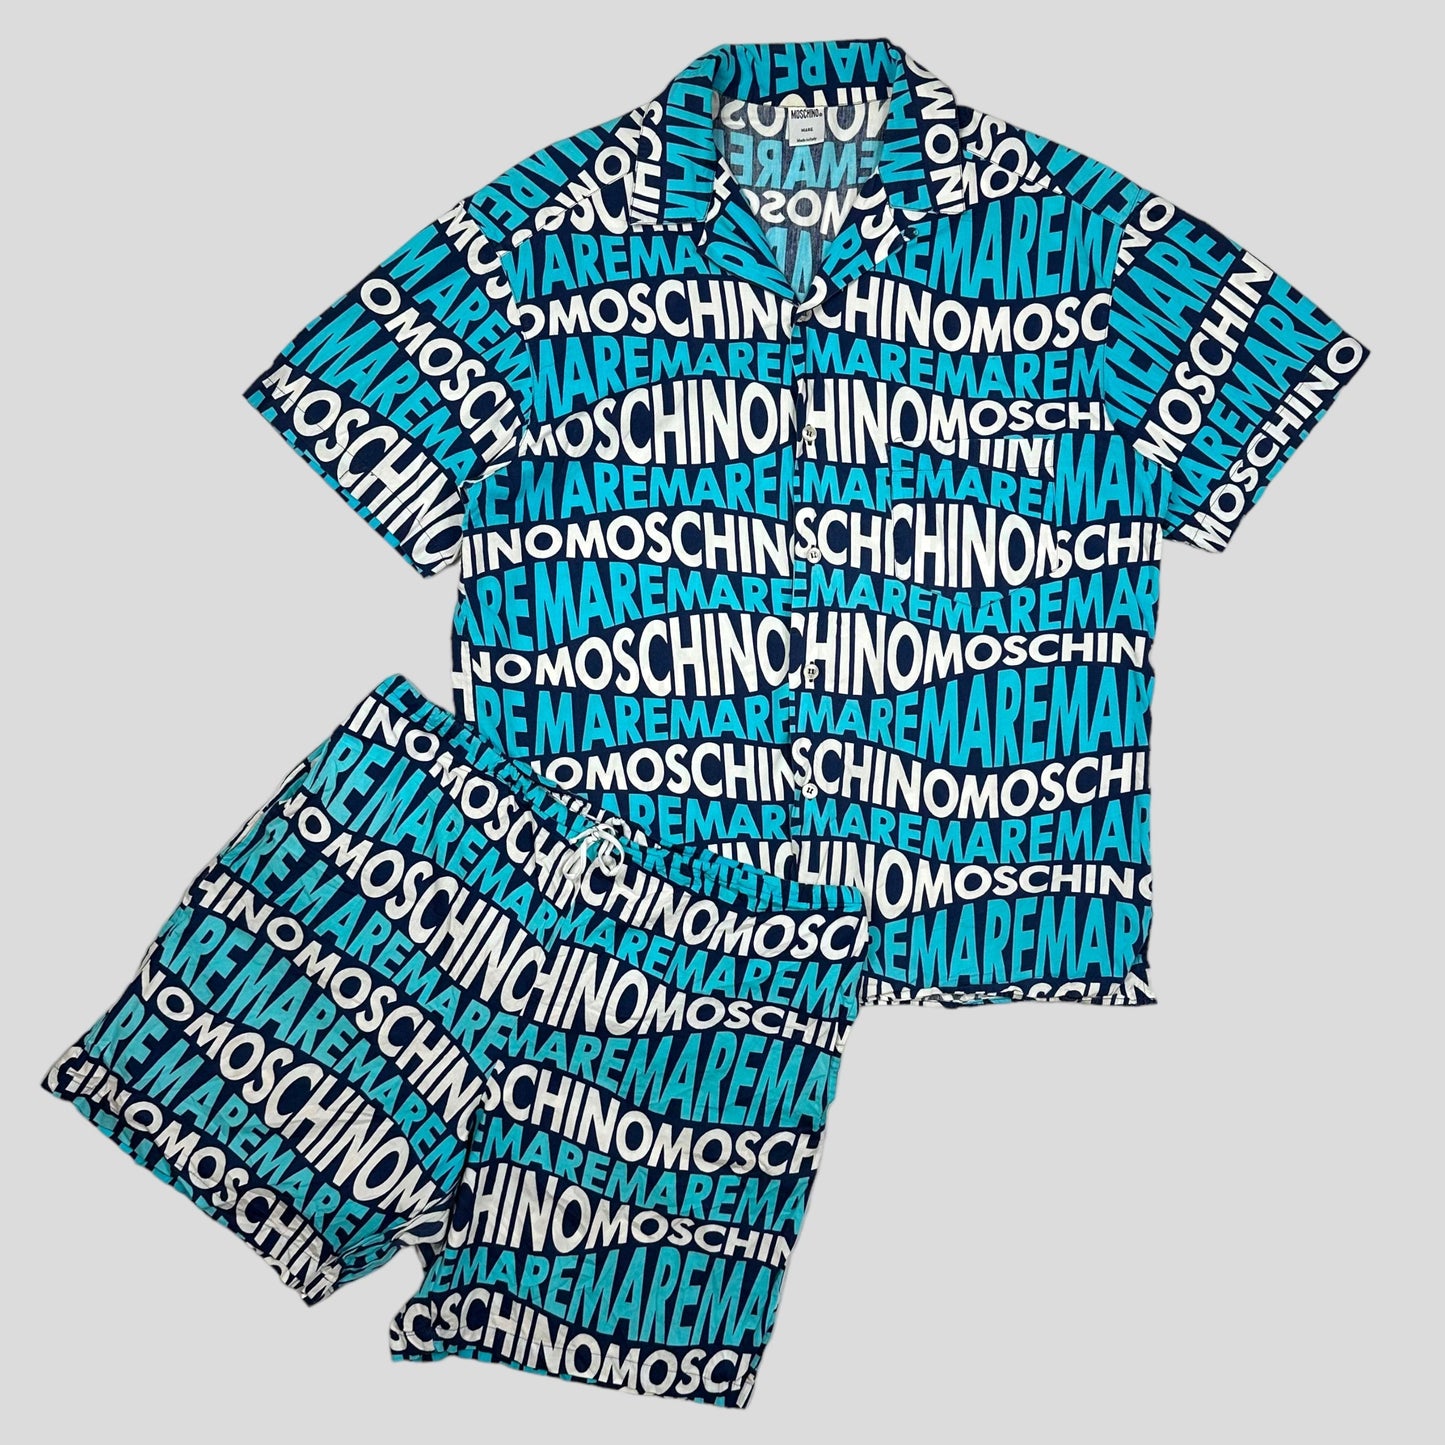 Moschino Mare 90’s Spellout Set - L/XL - Known Source